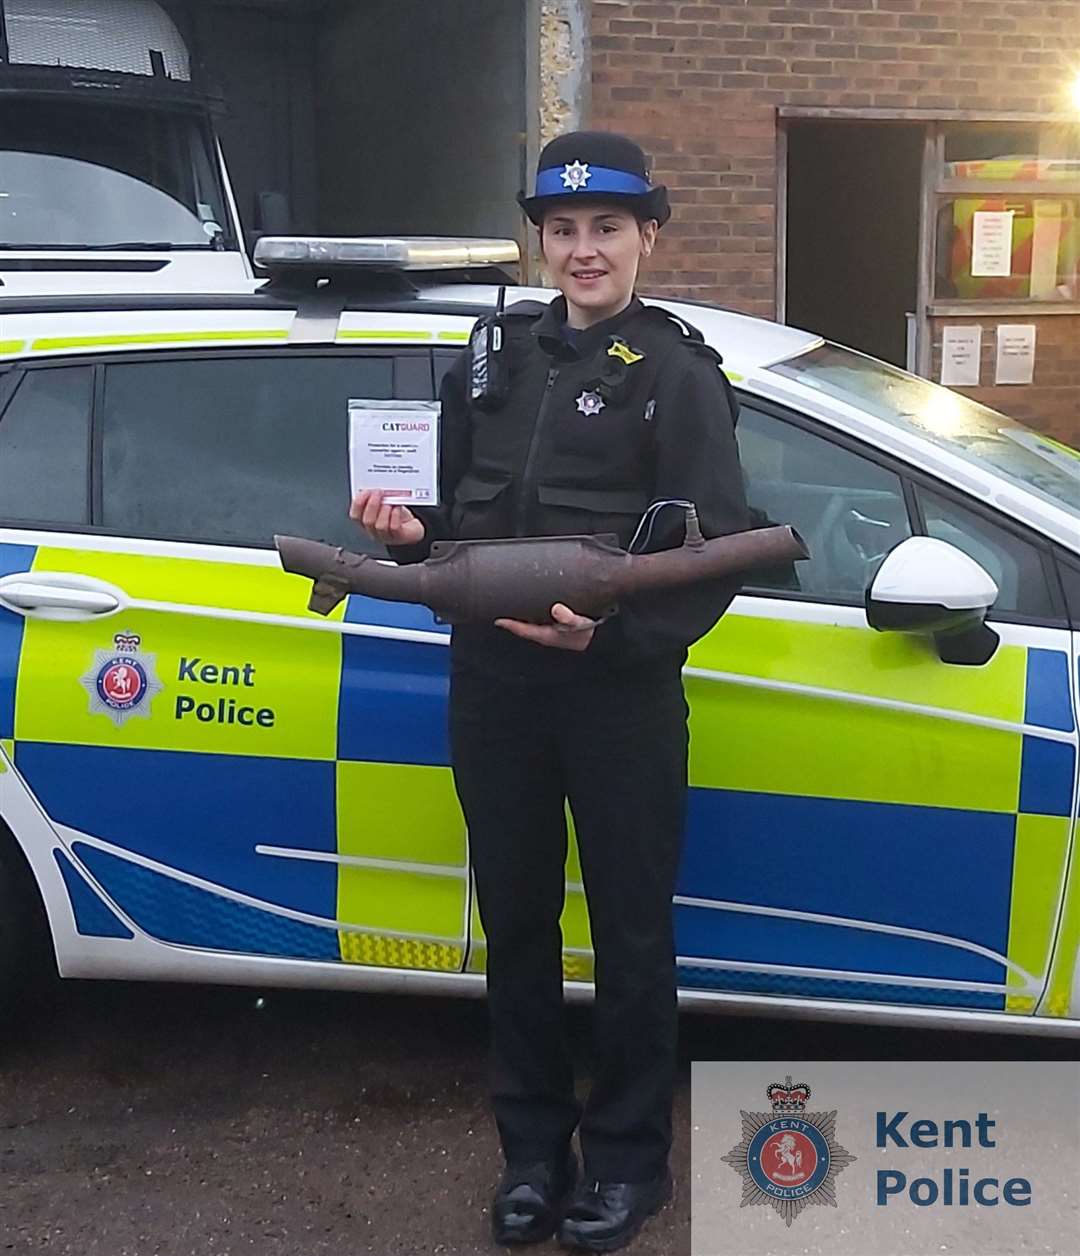 Kent Police has recently ramped up its efforts to drive out the theft of car parts from the county